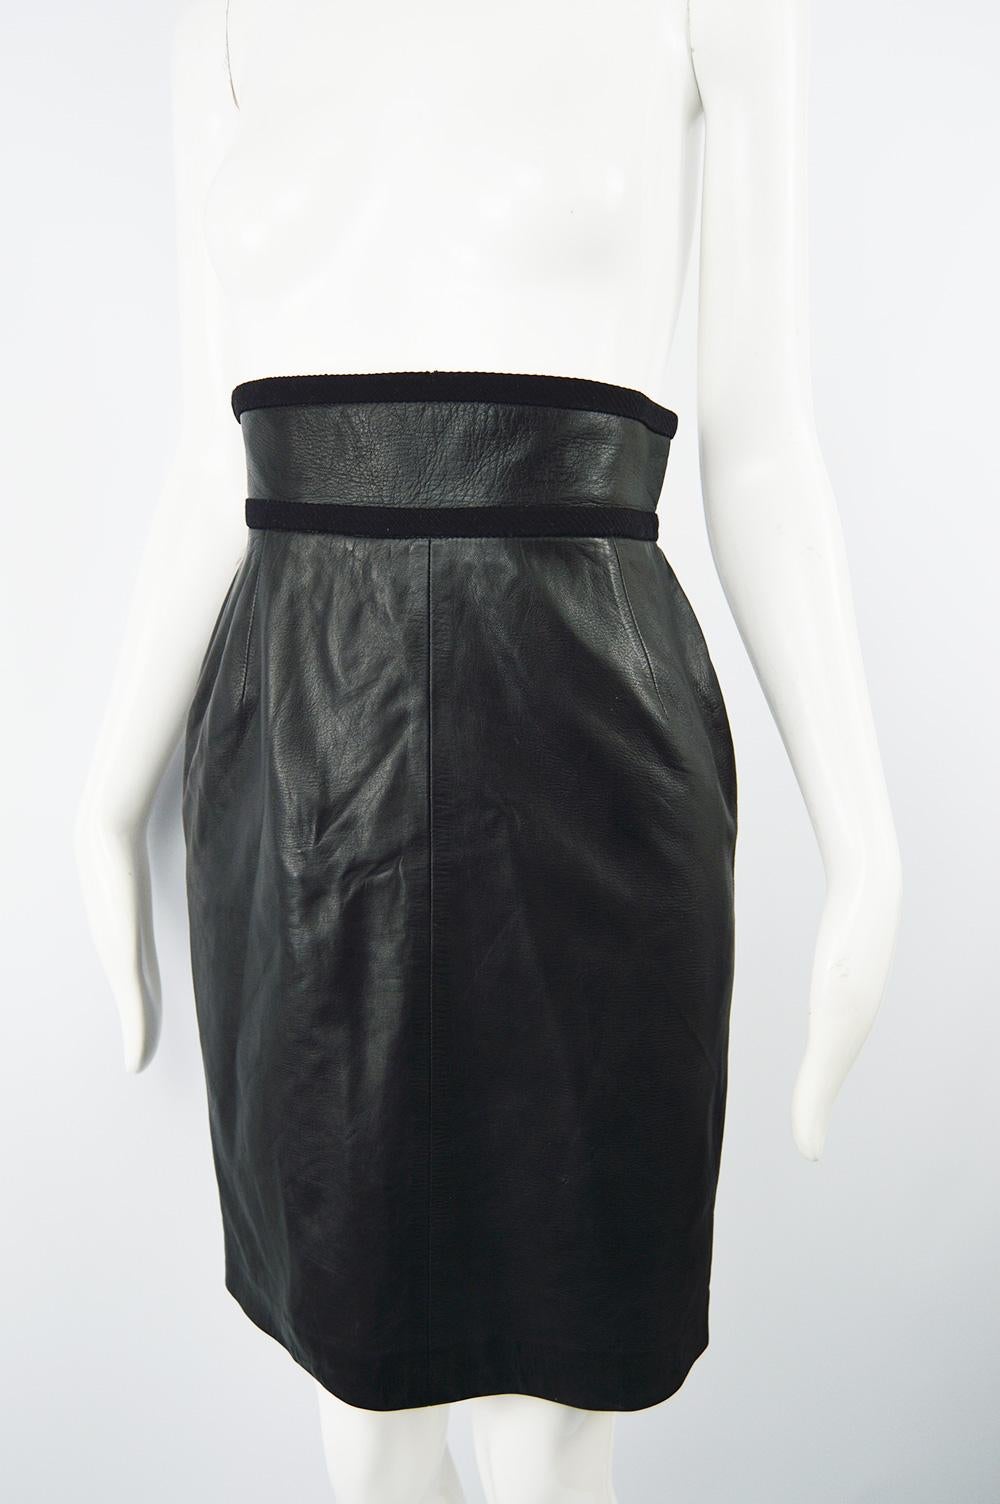 Loewe 1980s Black Leather Ultra High Waist Women's Vintage Pencil Skirt In Good Condition For Sale In Doncaster, South Yorkshire